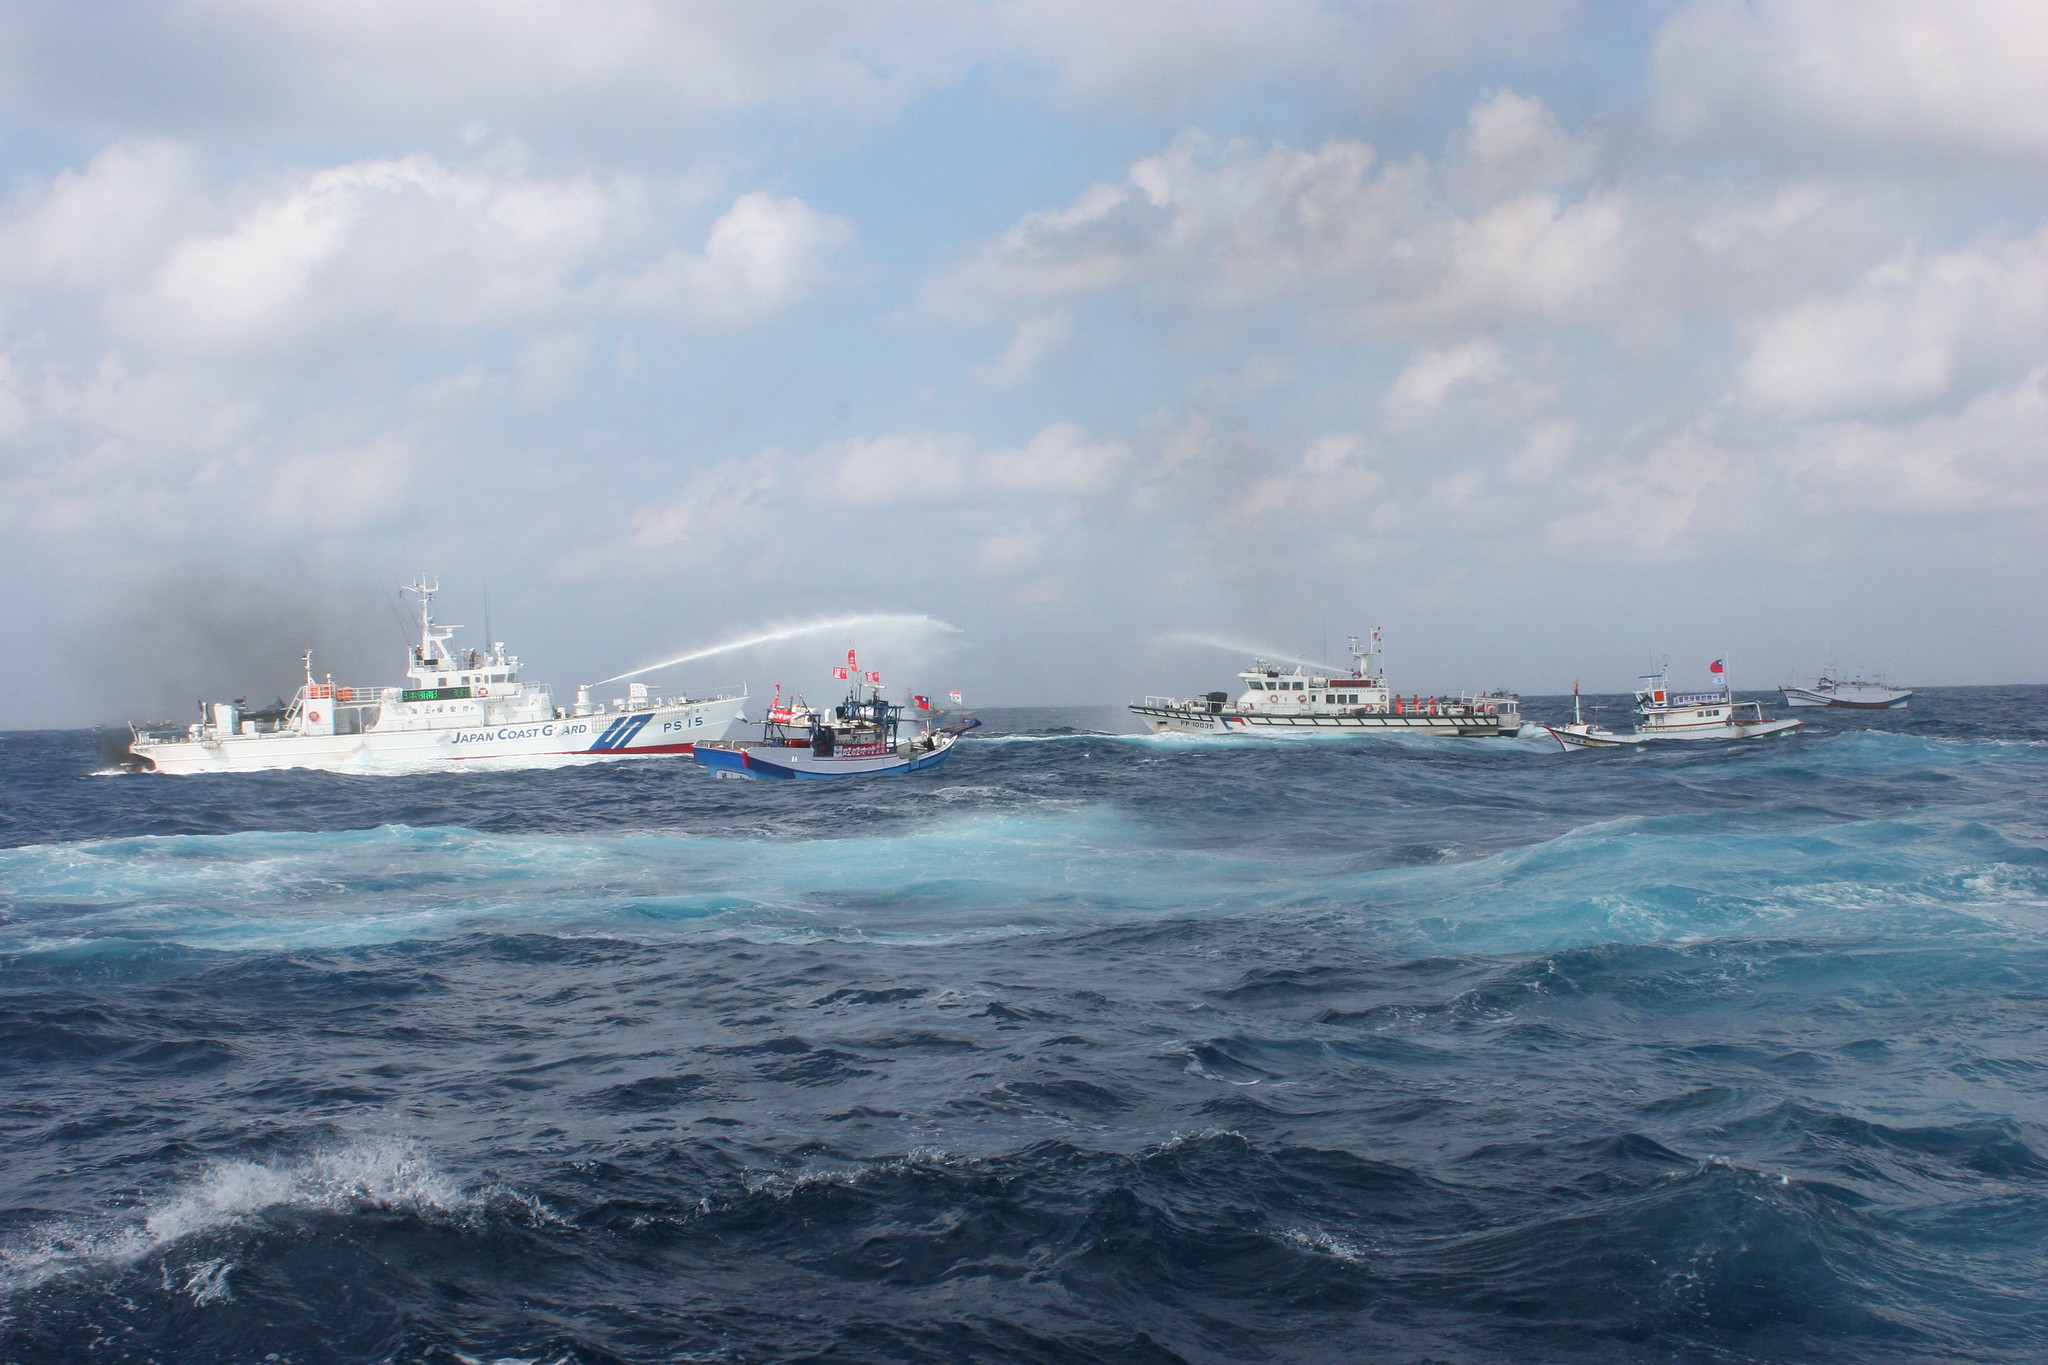 ROC’s Coast Guard Administration vessels return water cannon fire of their Japanese counterparts near Diaoyutai territorial waters to protect ROC fishermen on 25 September 2012. © Office of the President, ROC (Taiwan) / Flickr 